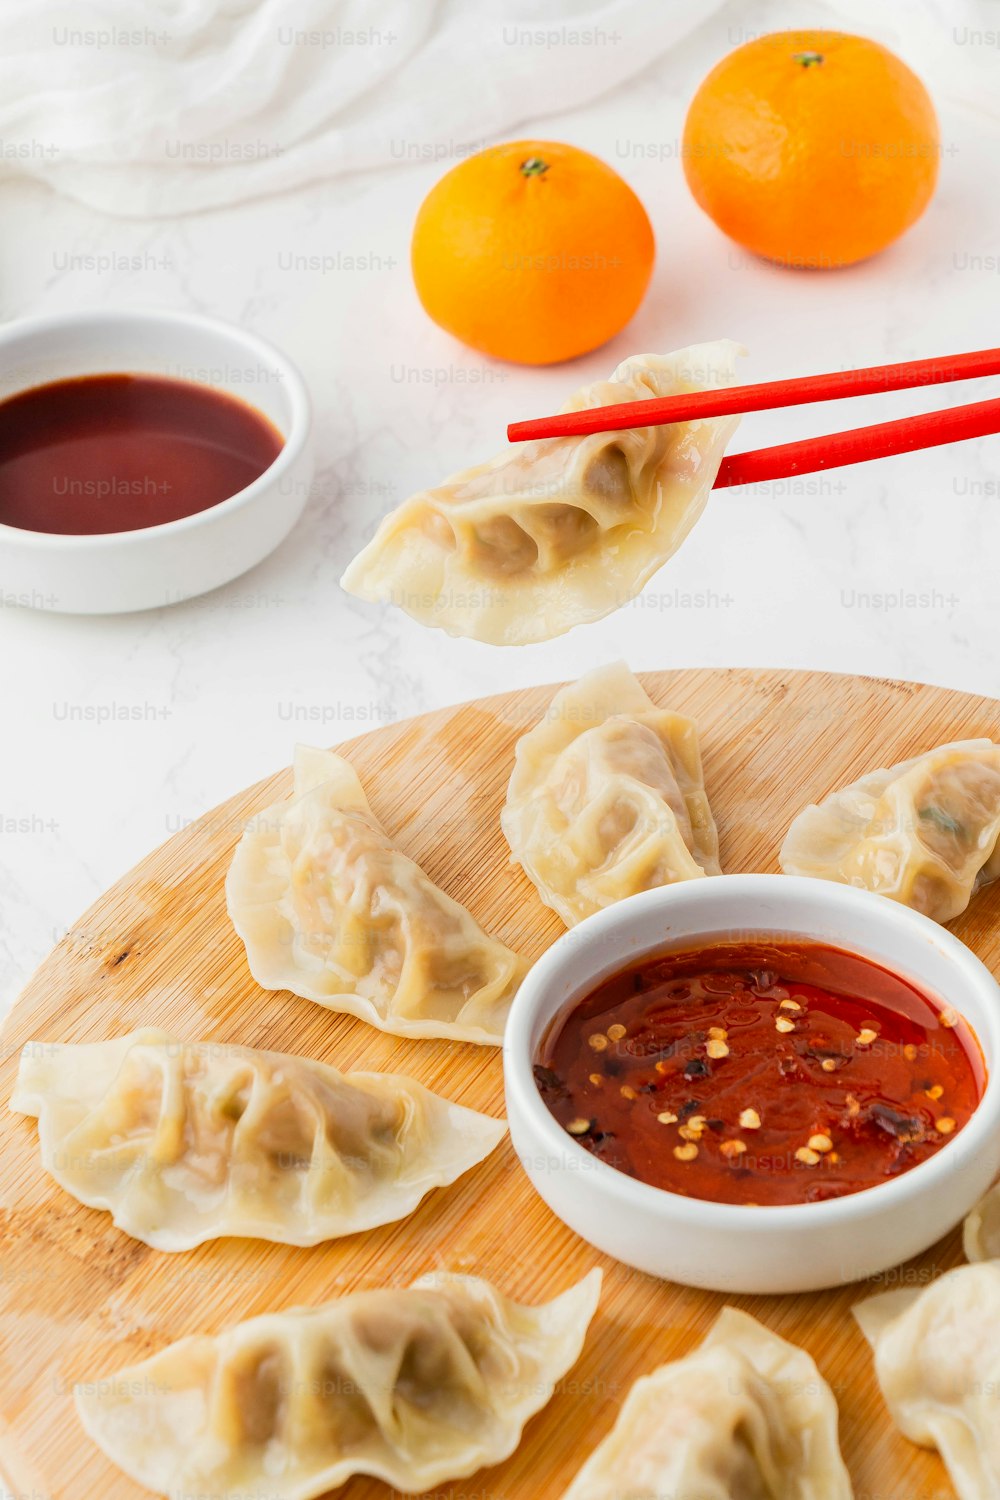 a plate of dumplings with dipping sauce next to oranges